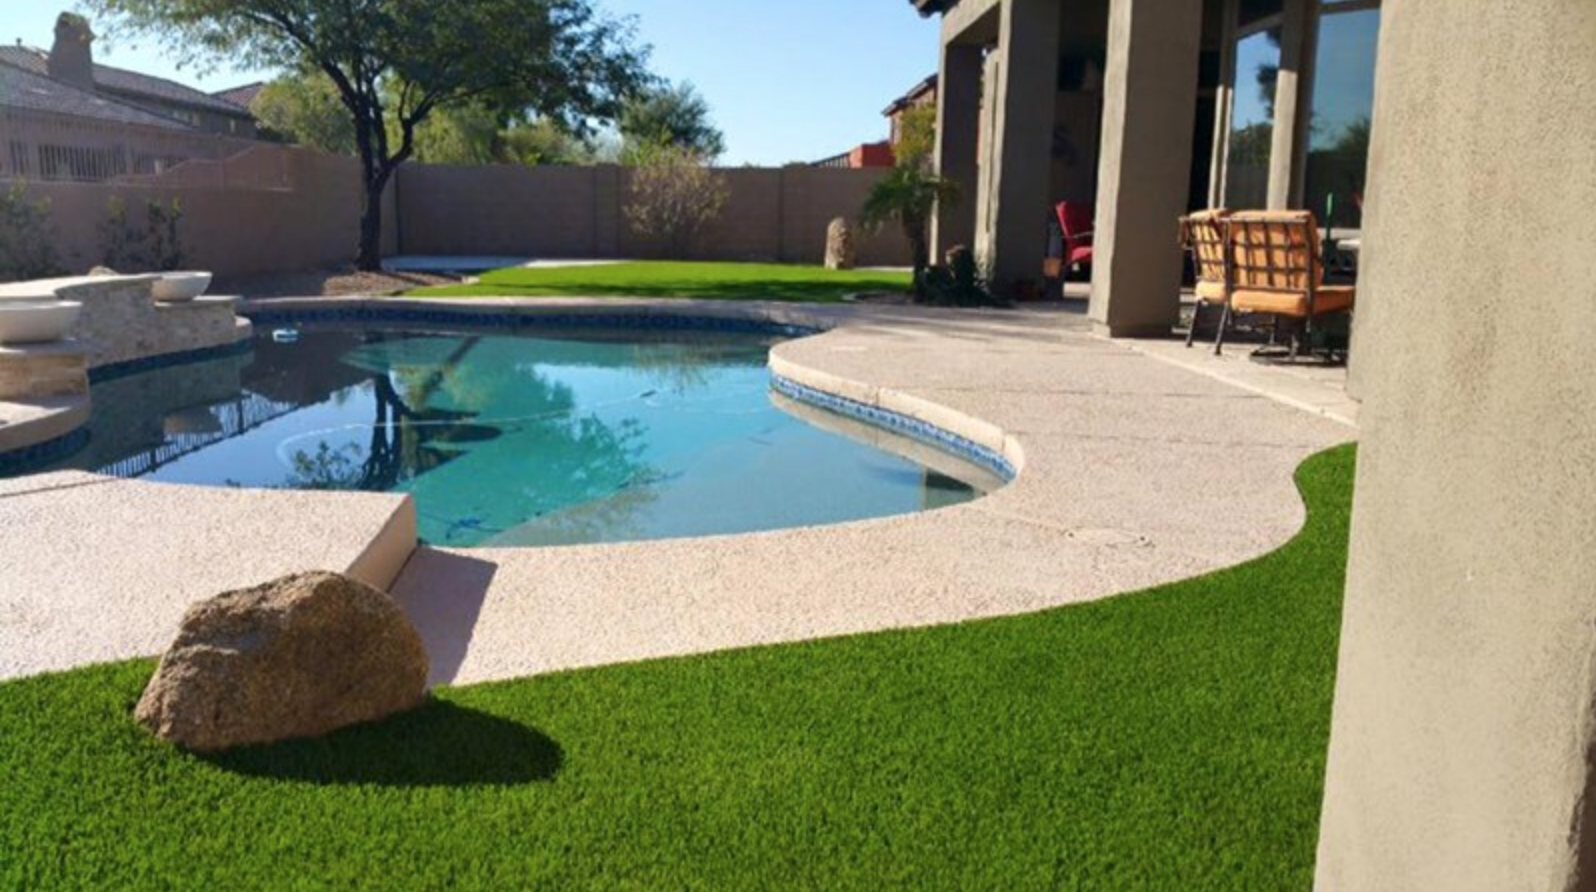  Artificial grass installation next to pool with boulders inset  